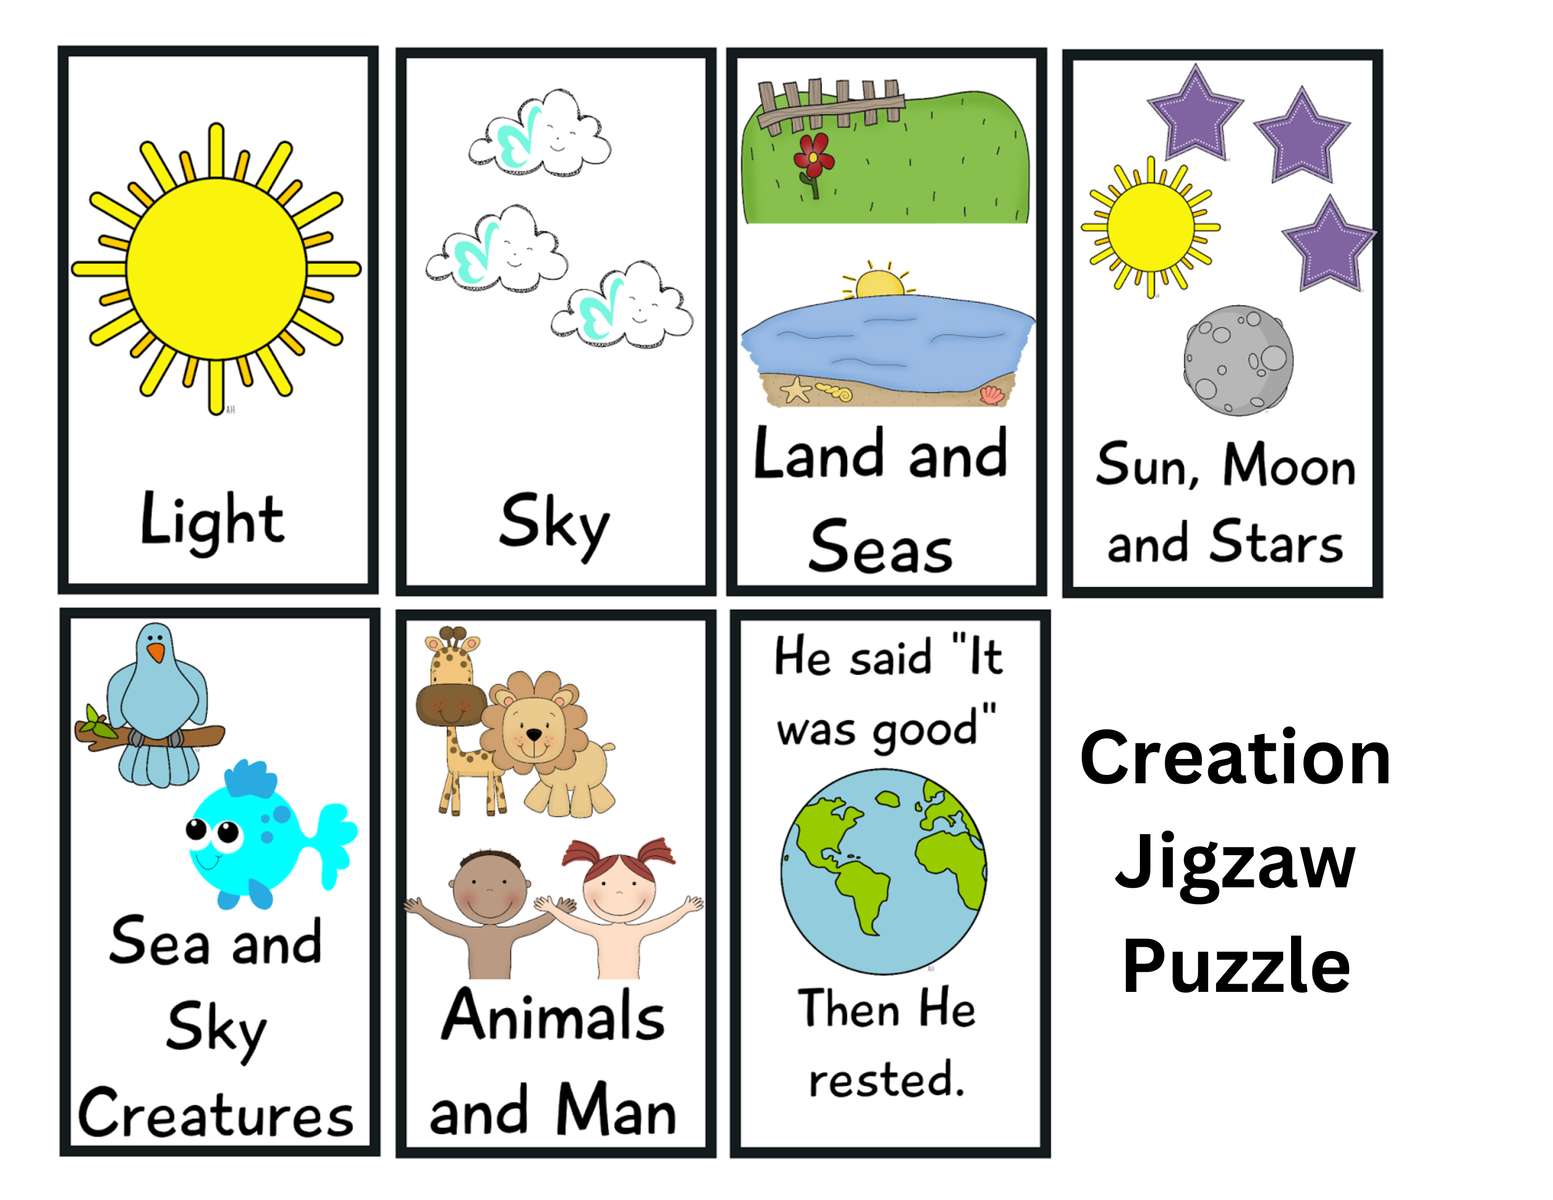 Creation Jigsaw Puzzle puzzle online from photo